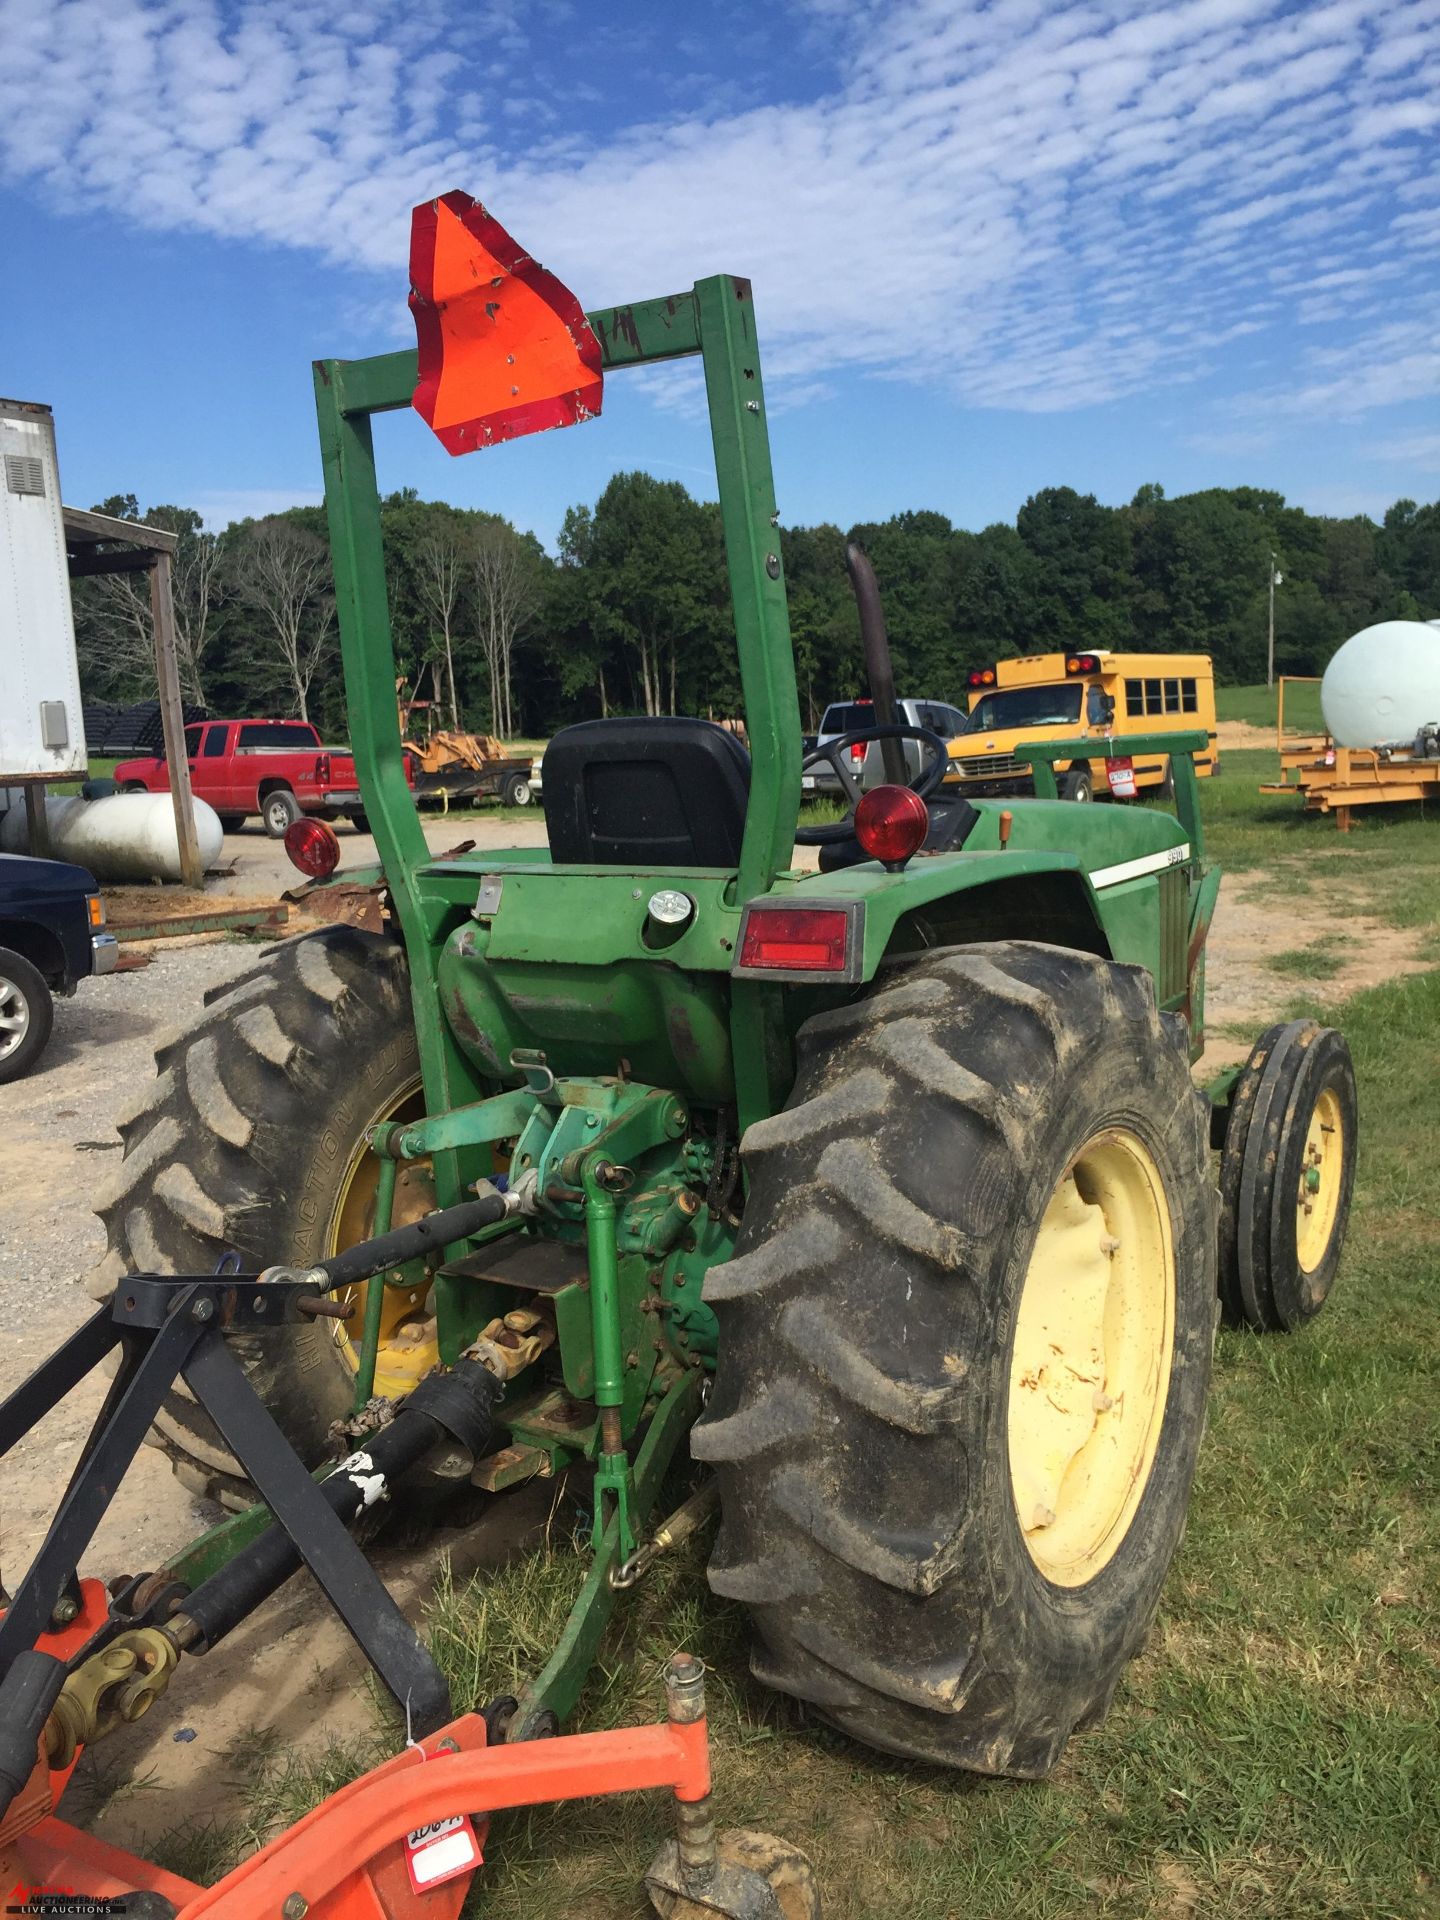 2001 JOHN DEERE 990 TRACTOR, 3PT, PTO, 14.9-24 REAR TIRES, 5124 HOURS SHOWING (HOURS SUBJECT TO - Image 3 of 7